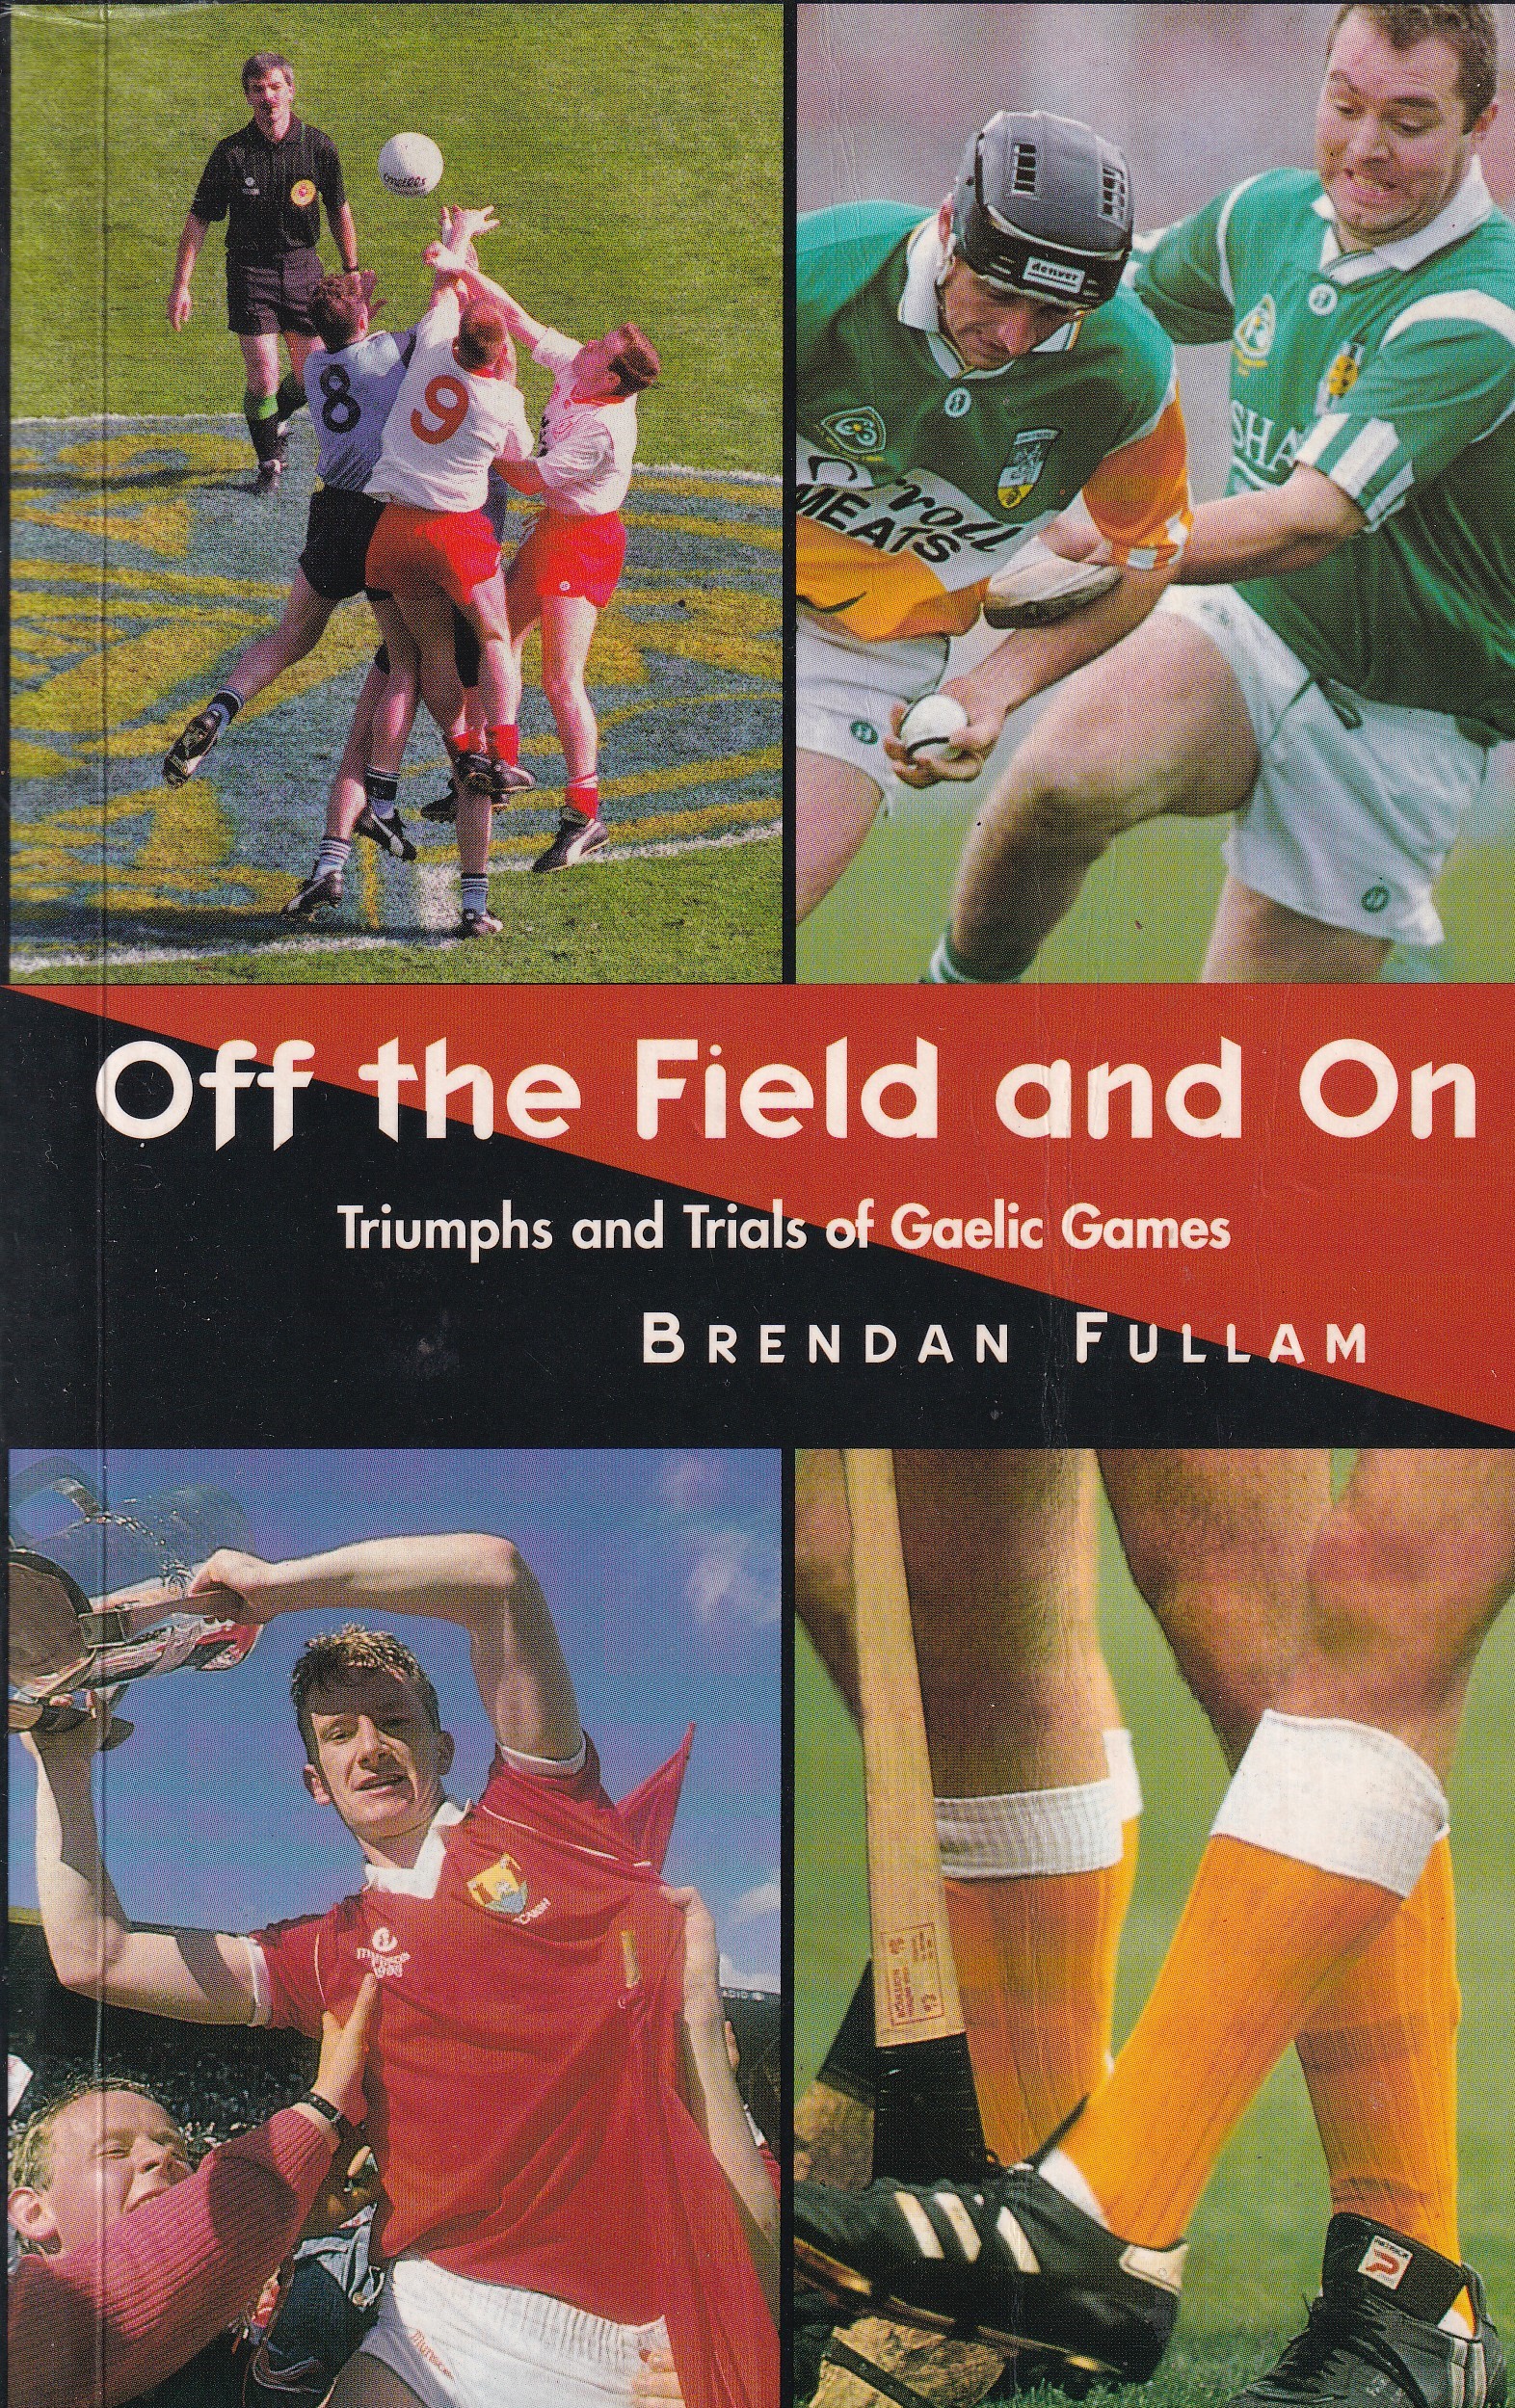 Off the Field and On: Triumphs and Trials of Gaelic Games | Brendan Fullam | Charlie Byrne's